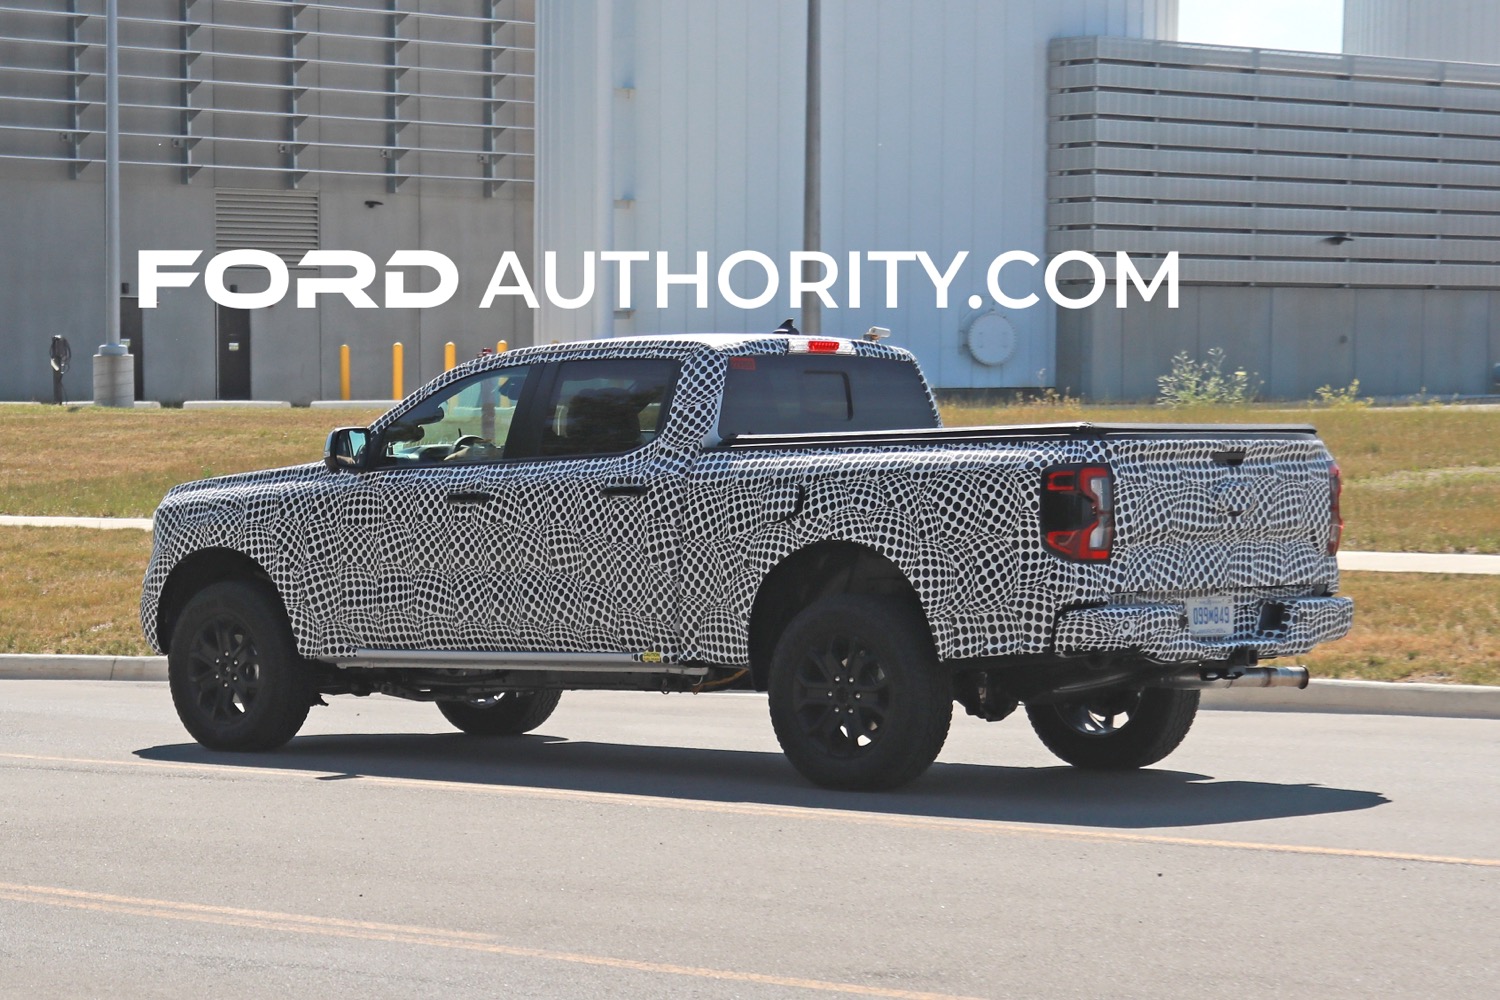 2024 Ford Ranger SuperCrew With Long Bed Spotted Testing In U.S. Ford